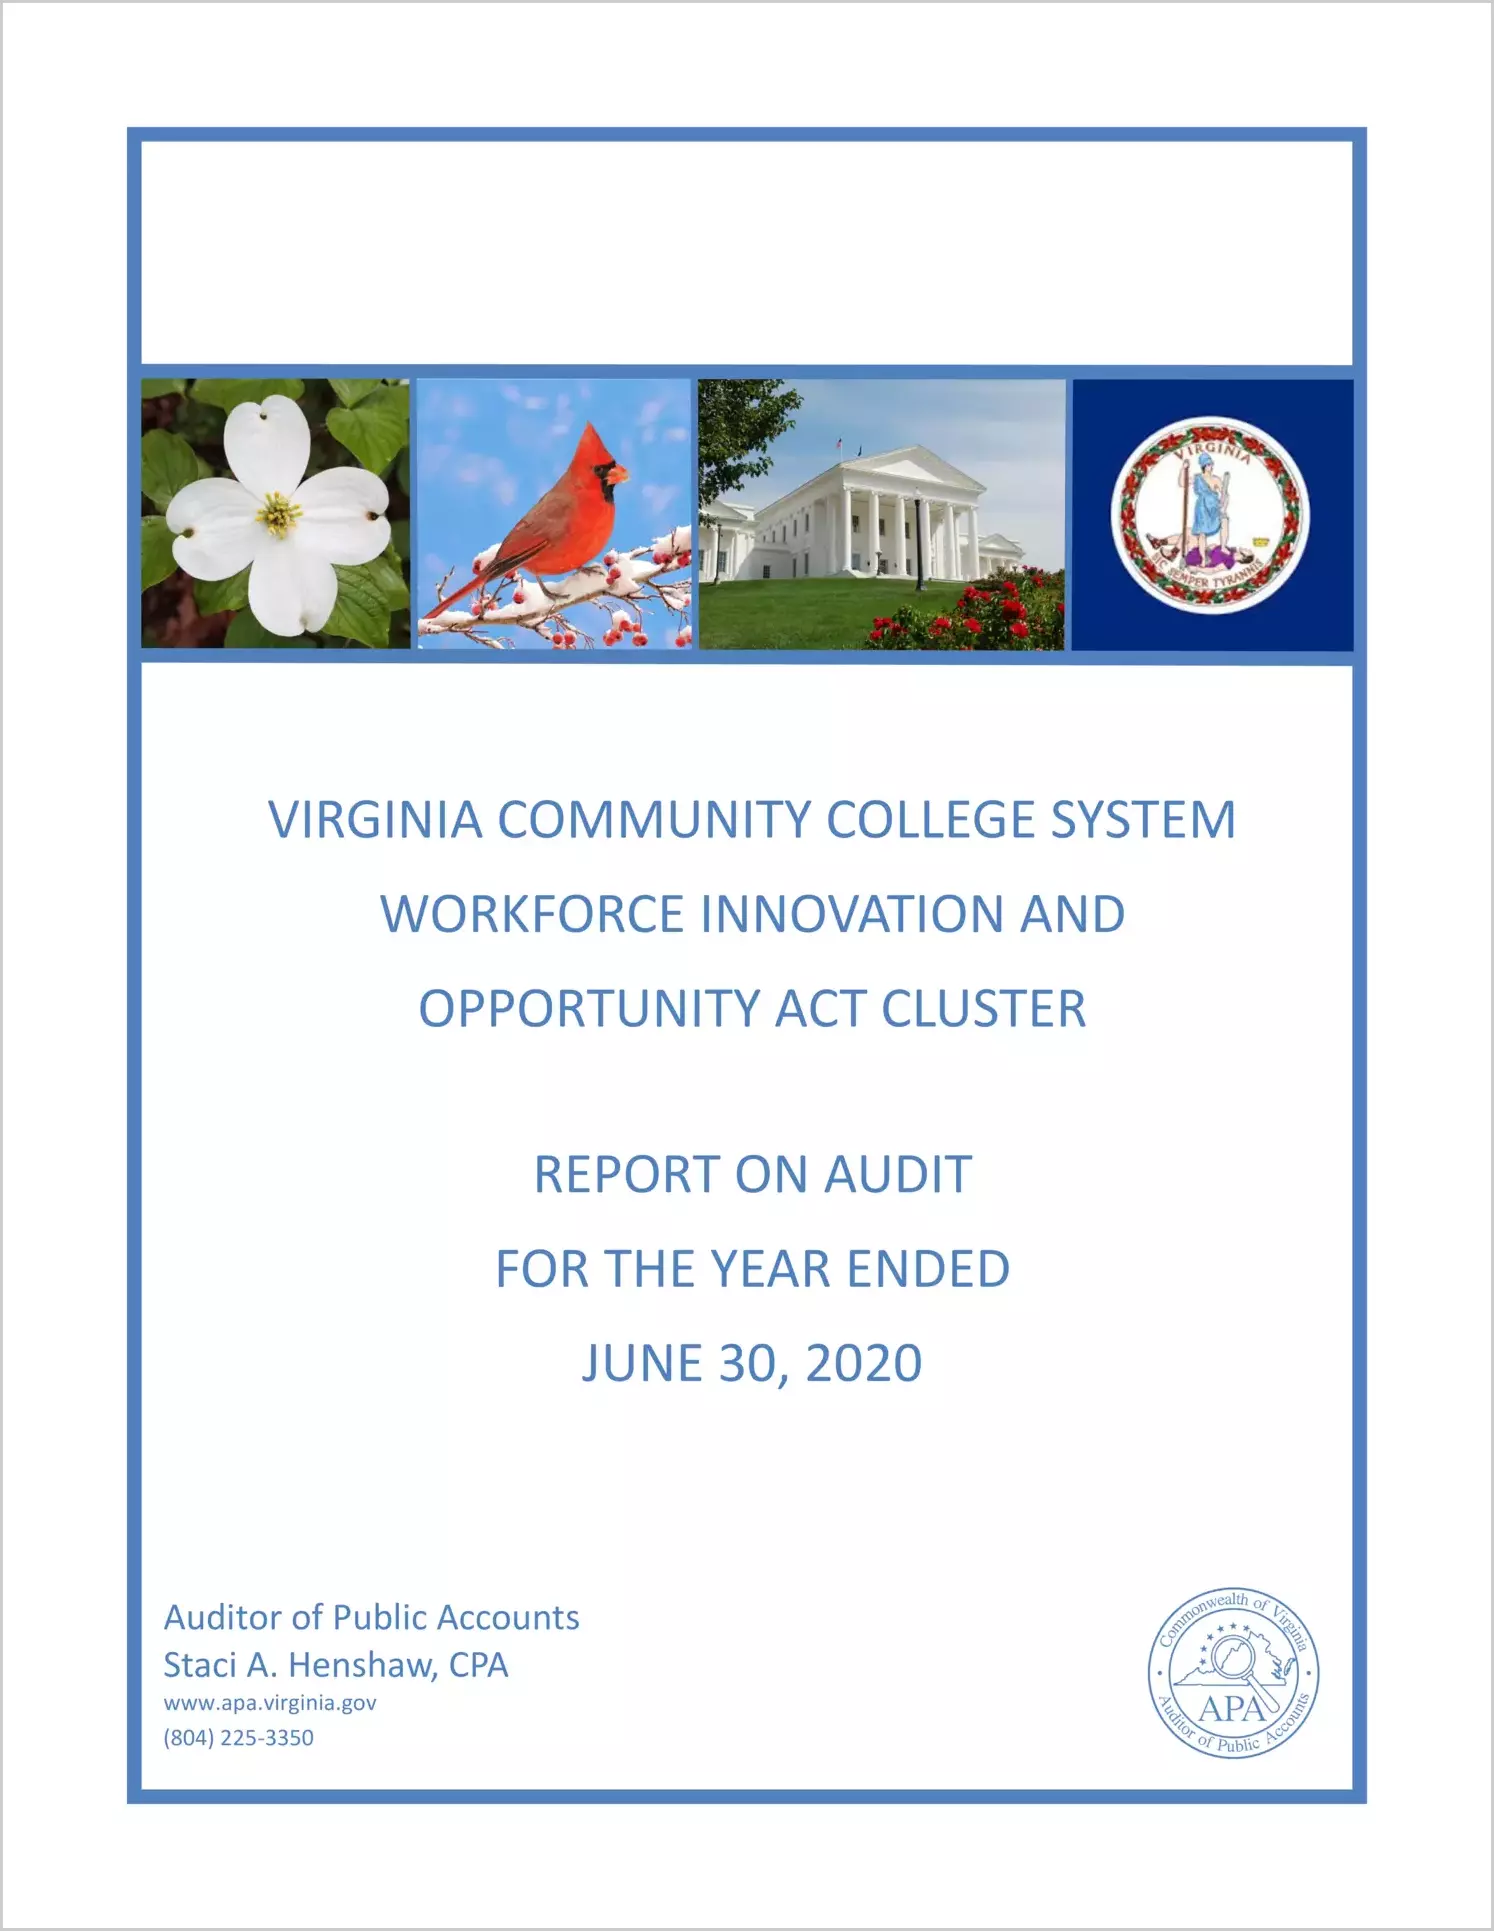 Virginia Community College System Workforce Innovation and Opportunity Act Cluster for the year ended June 30, 2020